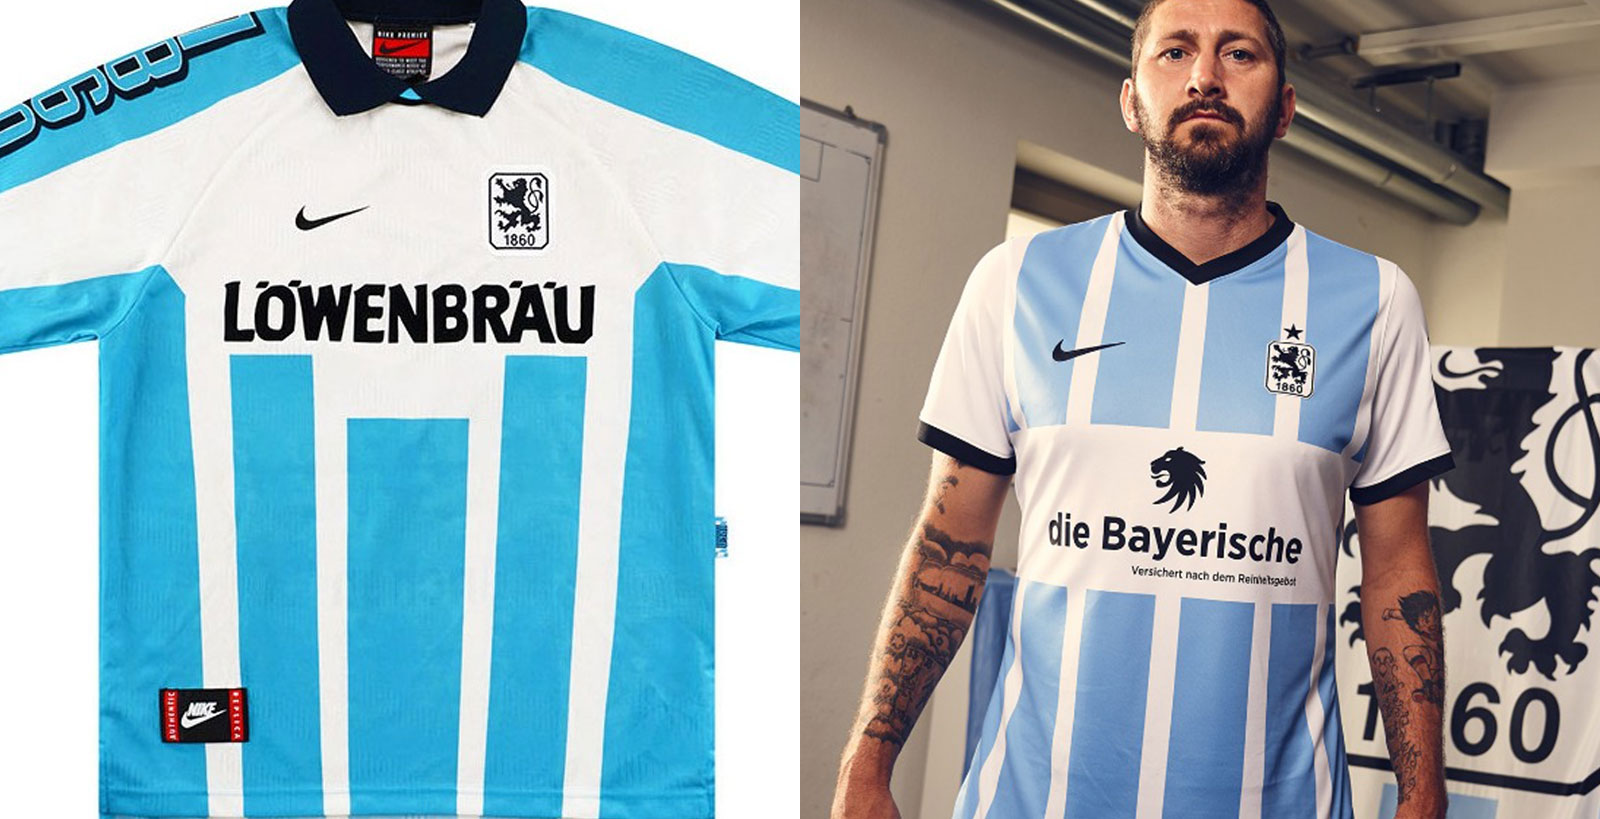 1860 München 22-23 Home and Third Kits Released - Footy Headlines